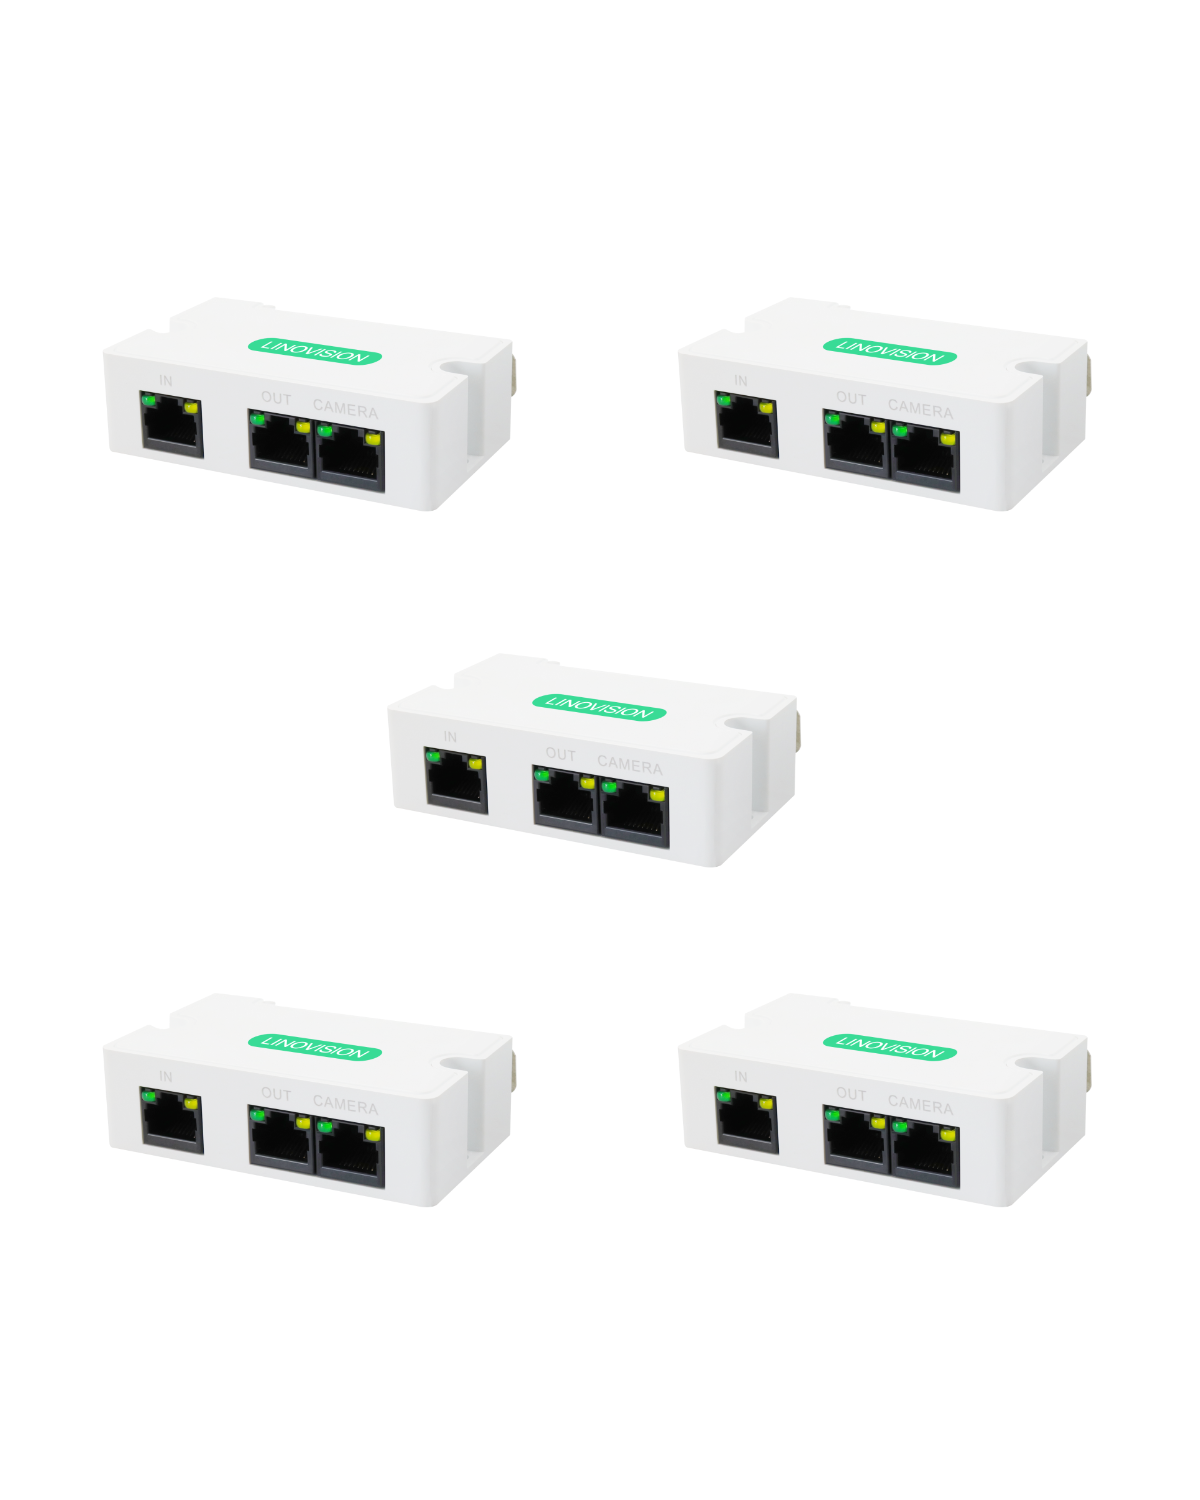 Mini 2-Port PoE Extender to Split One PoE cable for Two PoE devices 5pack